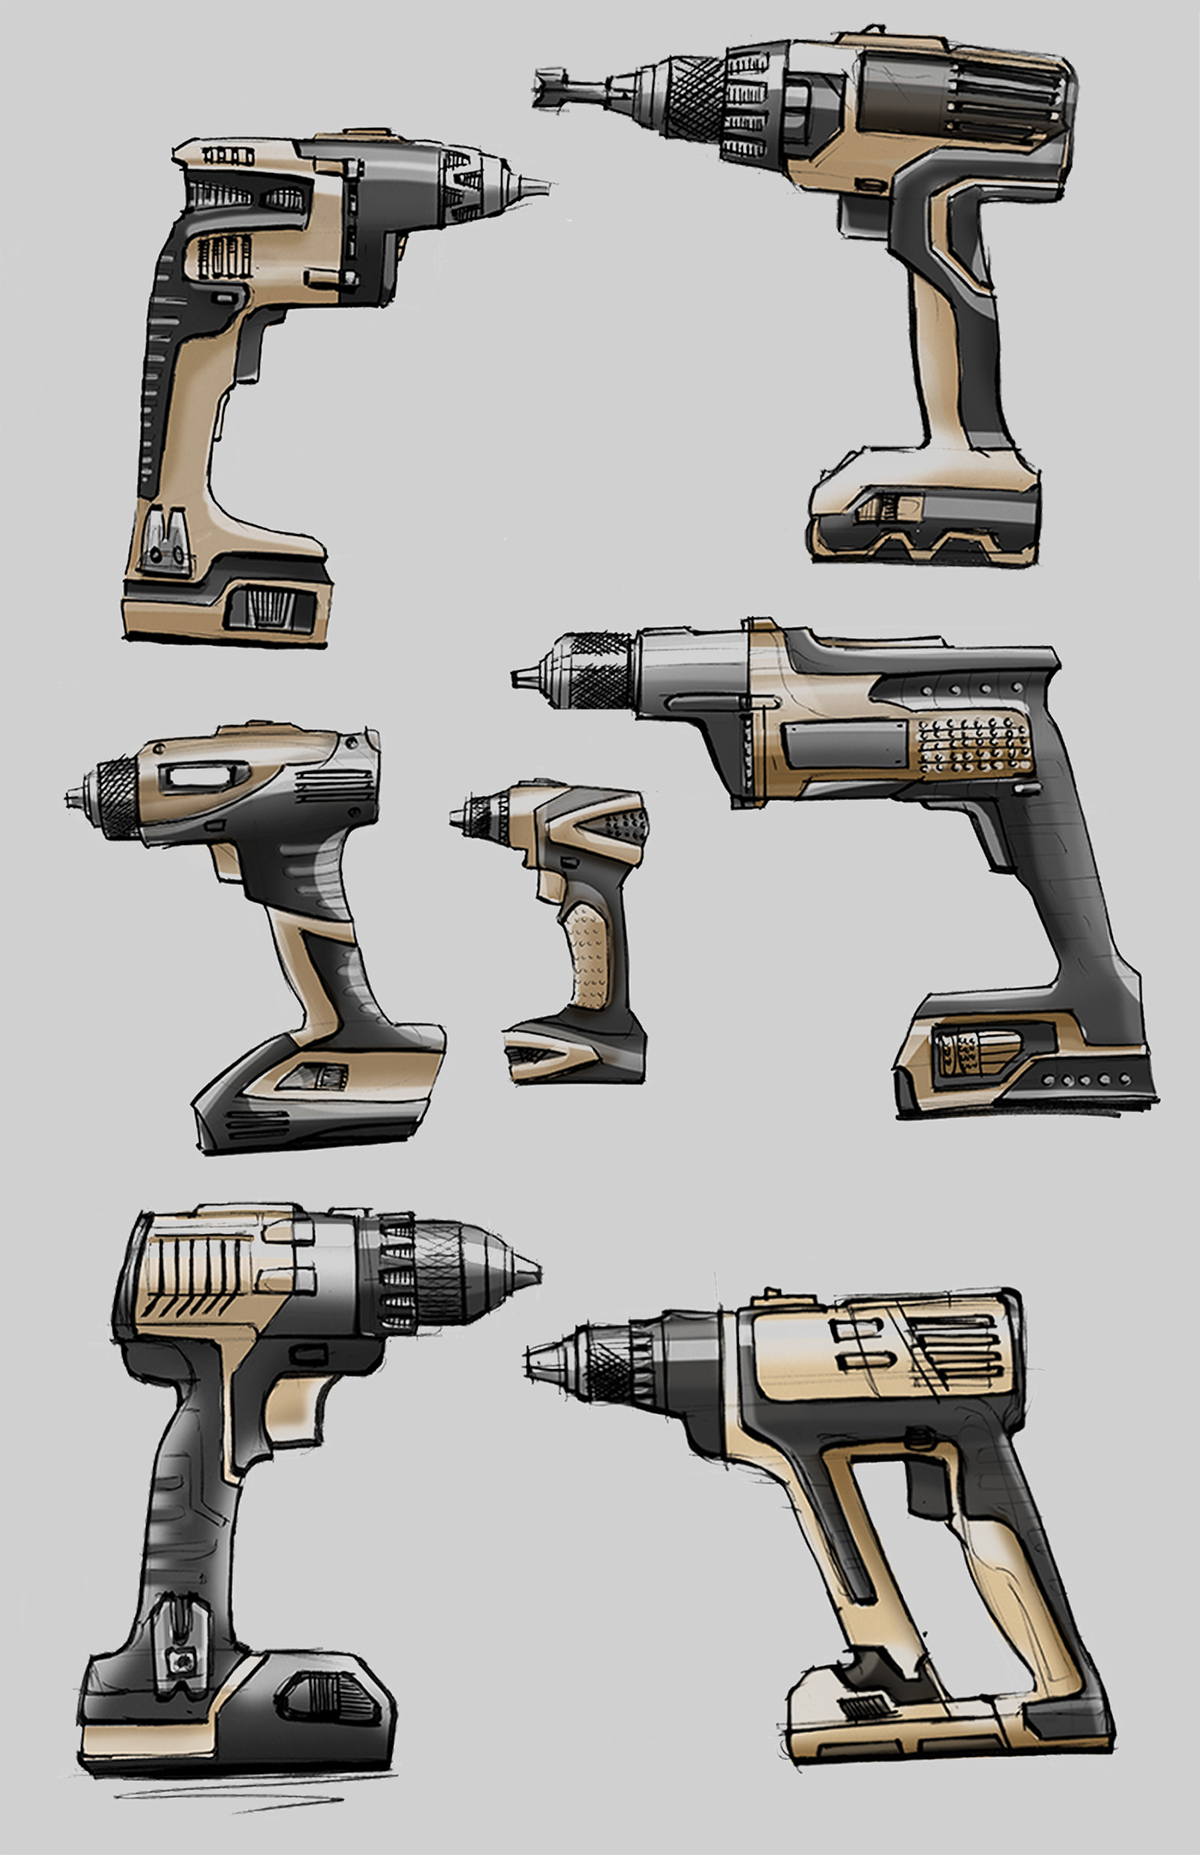 drill power tool power tool cordless cad sketching rendering Marker design process Rhino blender screwgun impact driver ideation